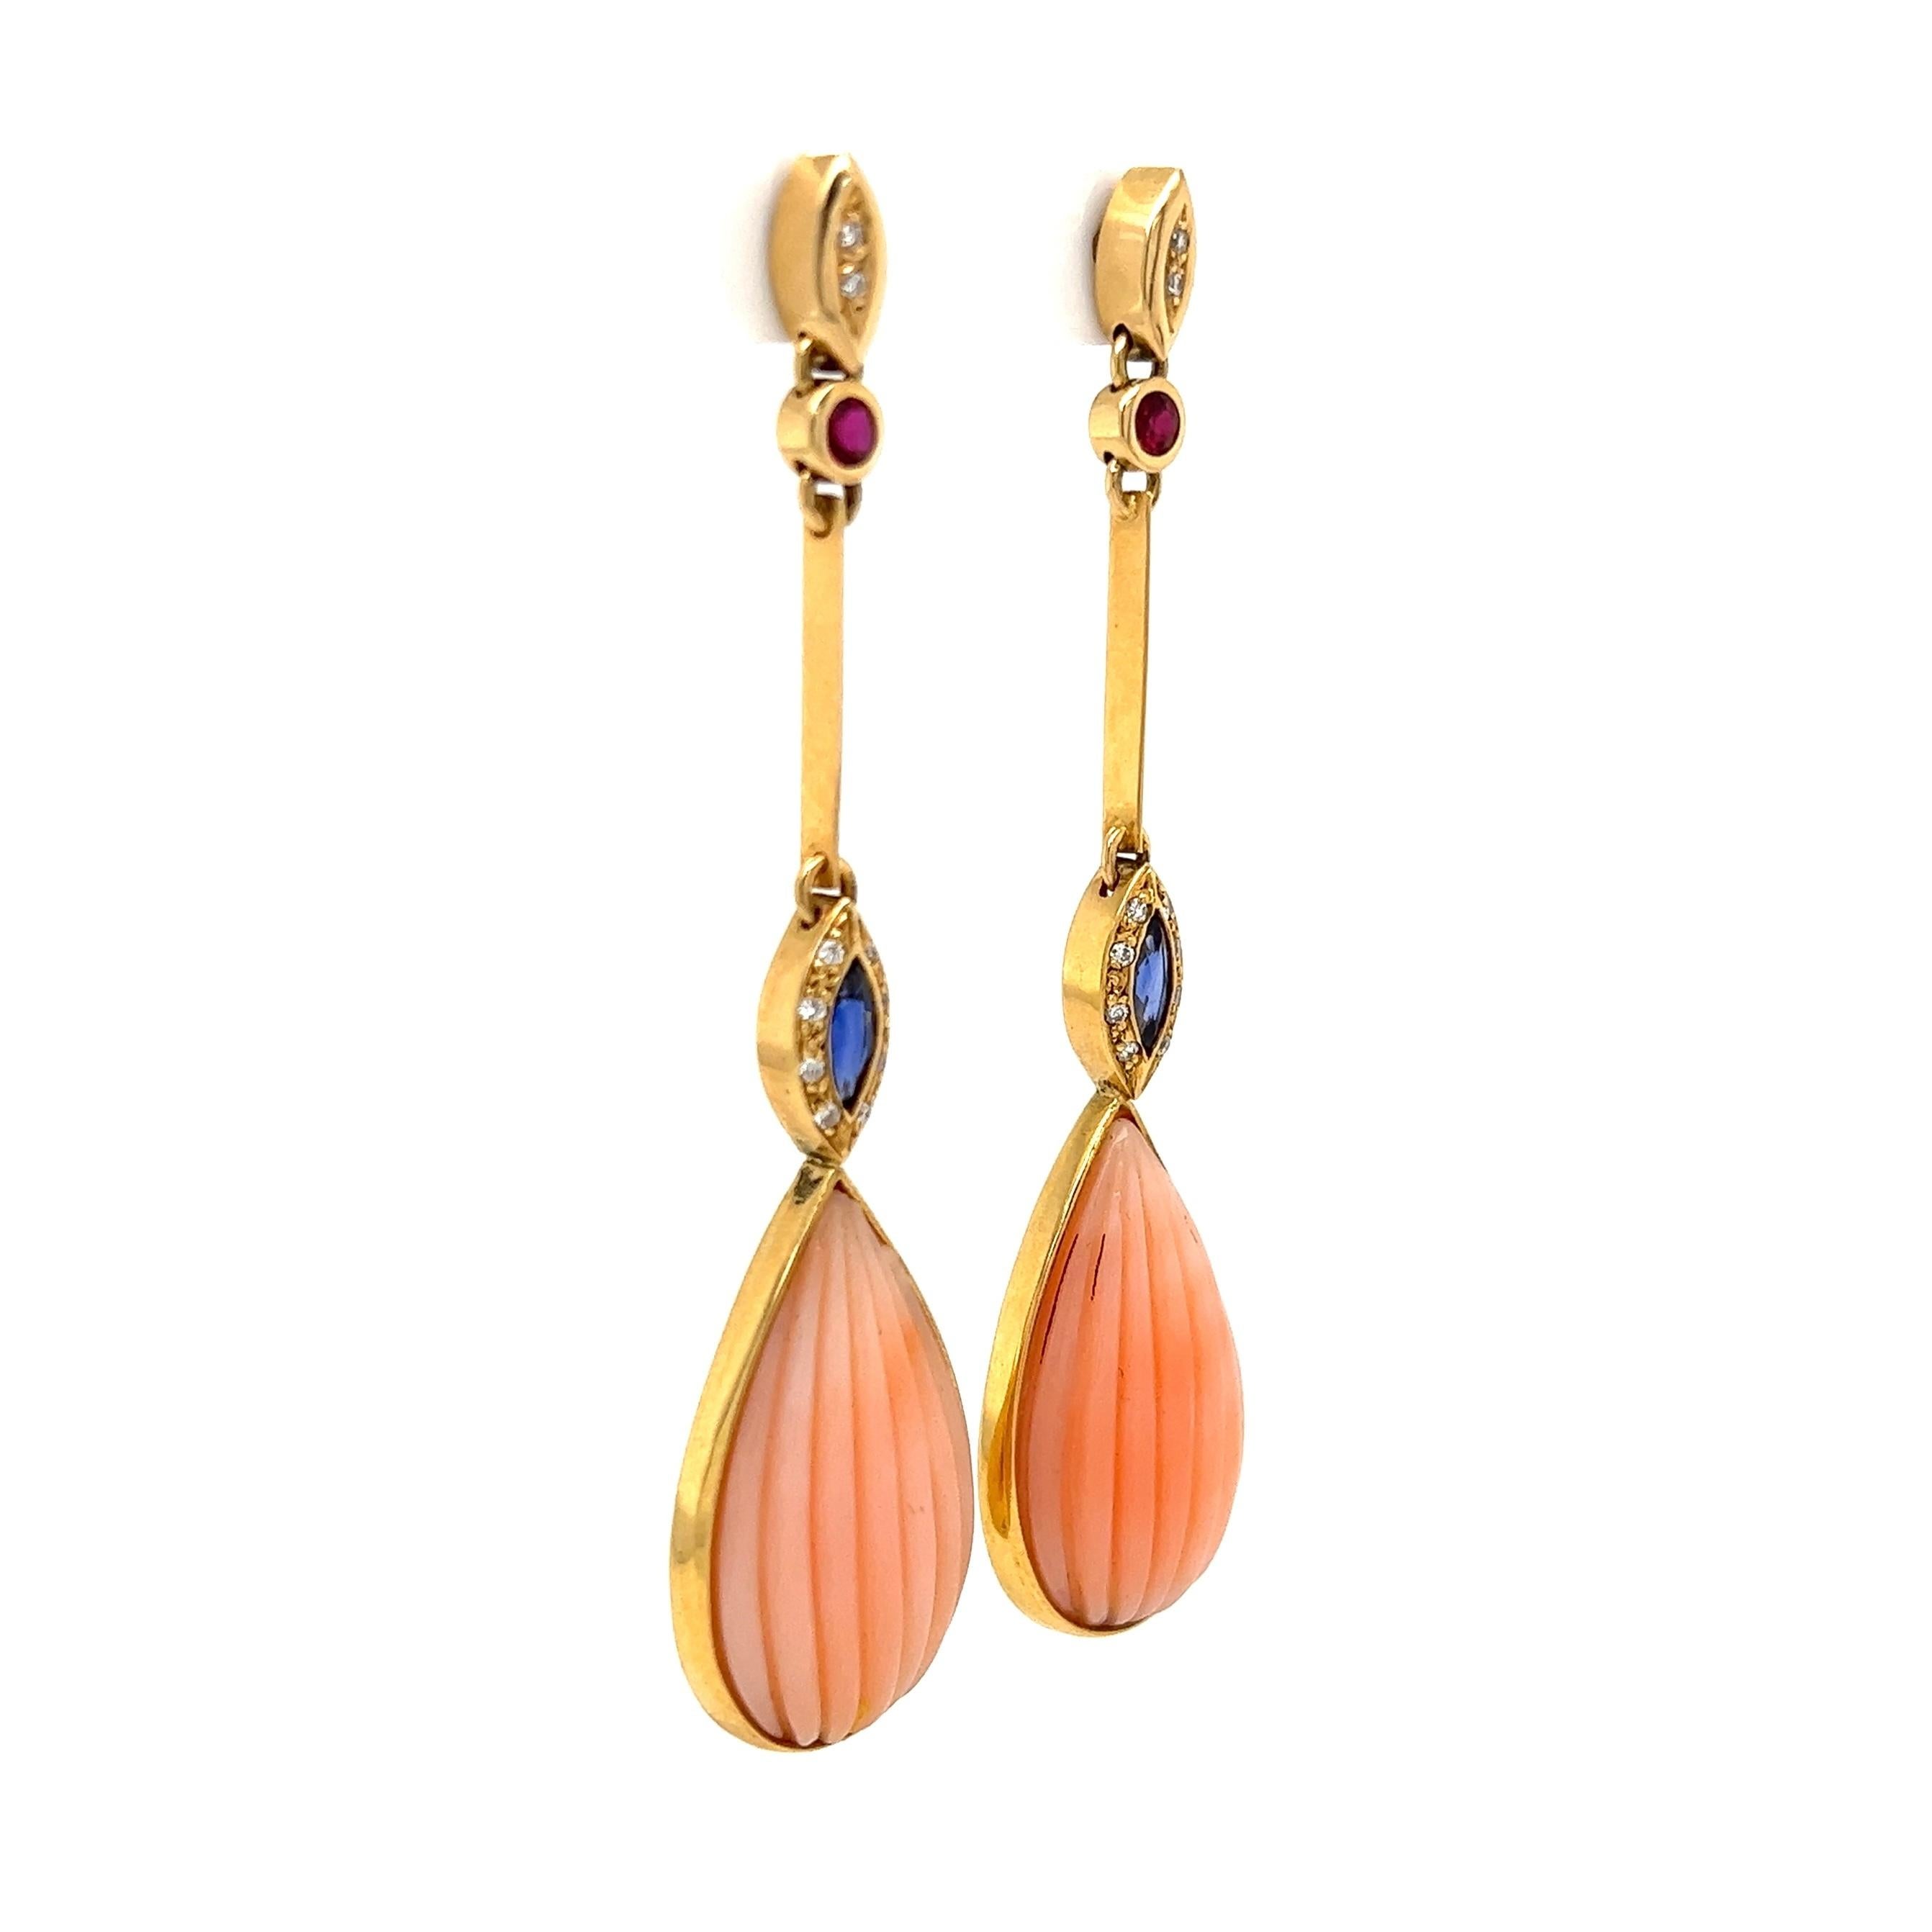 Simply Beautiful!  Finely detailed and Diamond Drop Earrings set with Angelskin Coral, Sapphire, Ruby Diamonds weighing approx. approx. 0.12 Carats, suspending Angelskin Coral Drops, providing an amazing look! Hand crafted in 18K Yellow Gold.